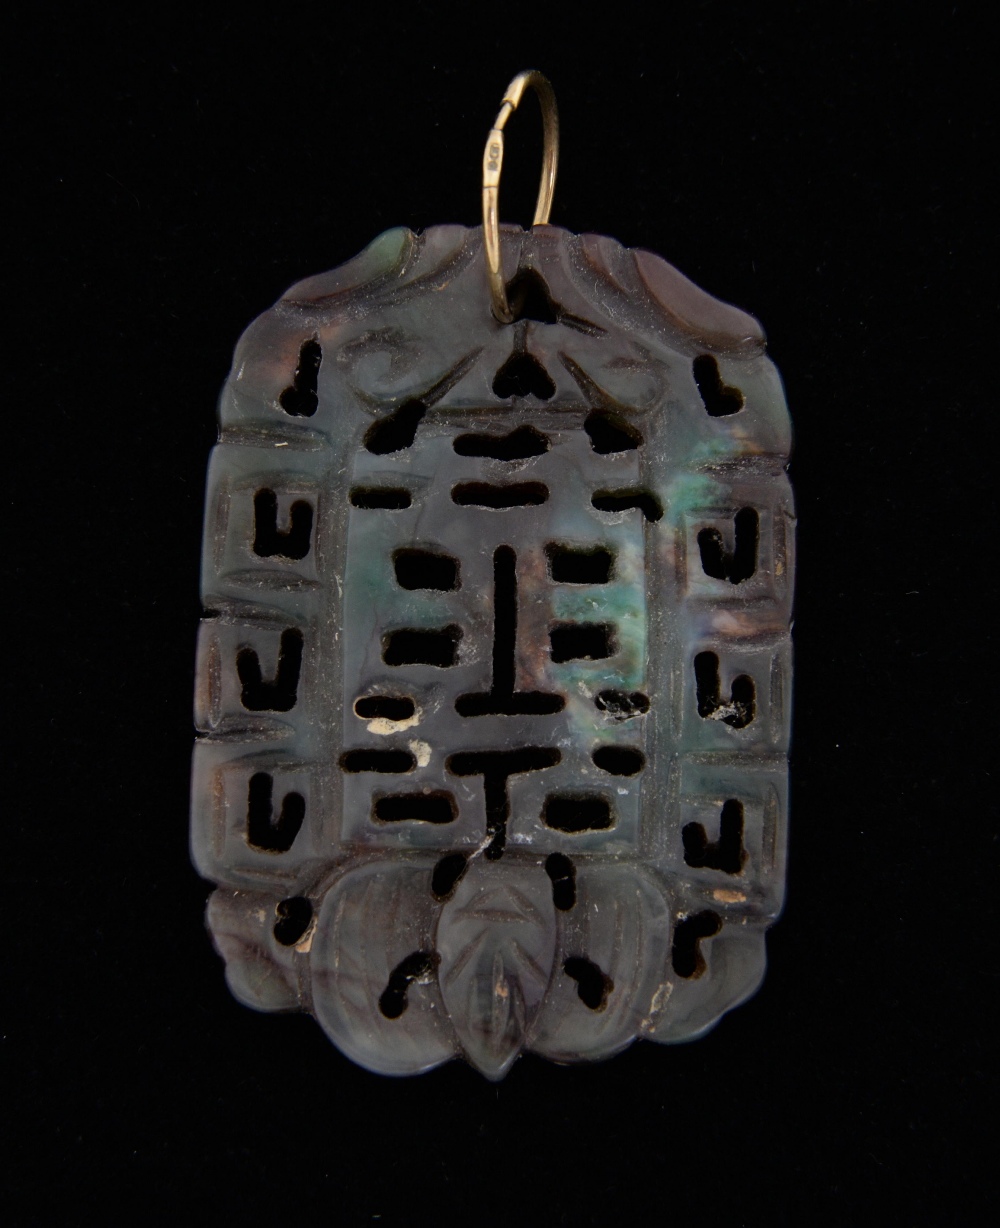 Chinese hardstone pendant carved with a bat and characters, 6.1cm x 4.2cm,